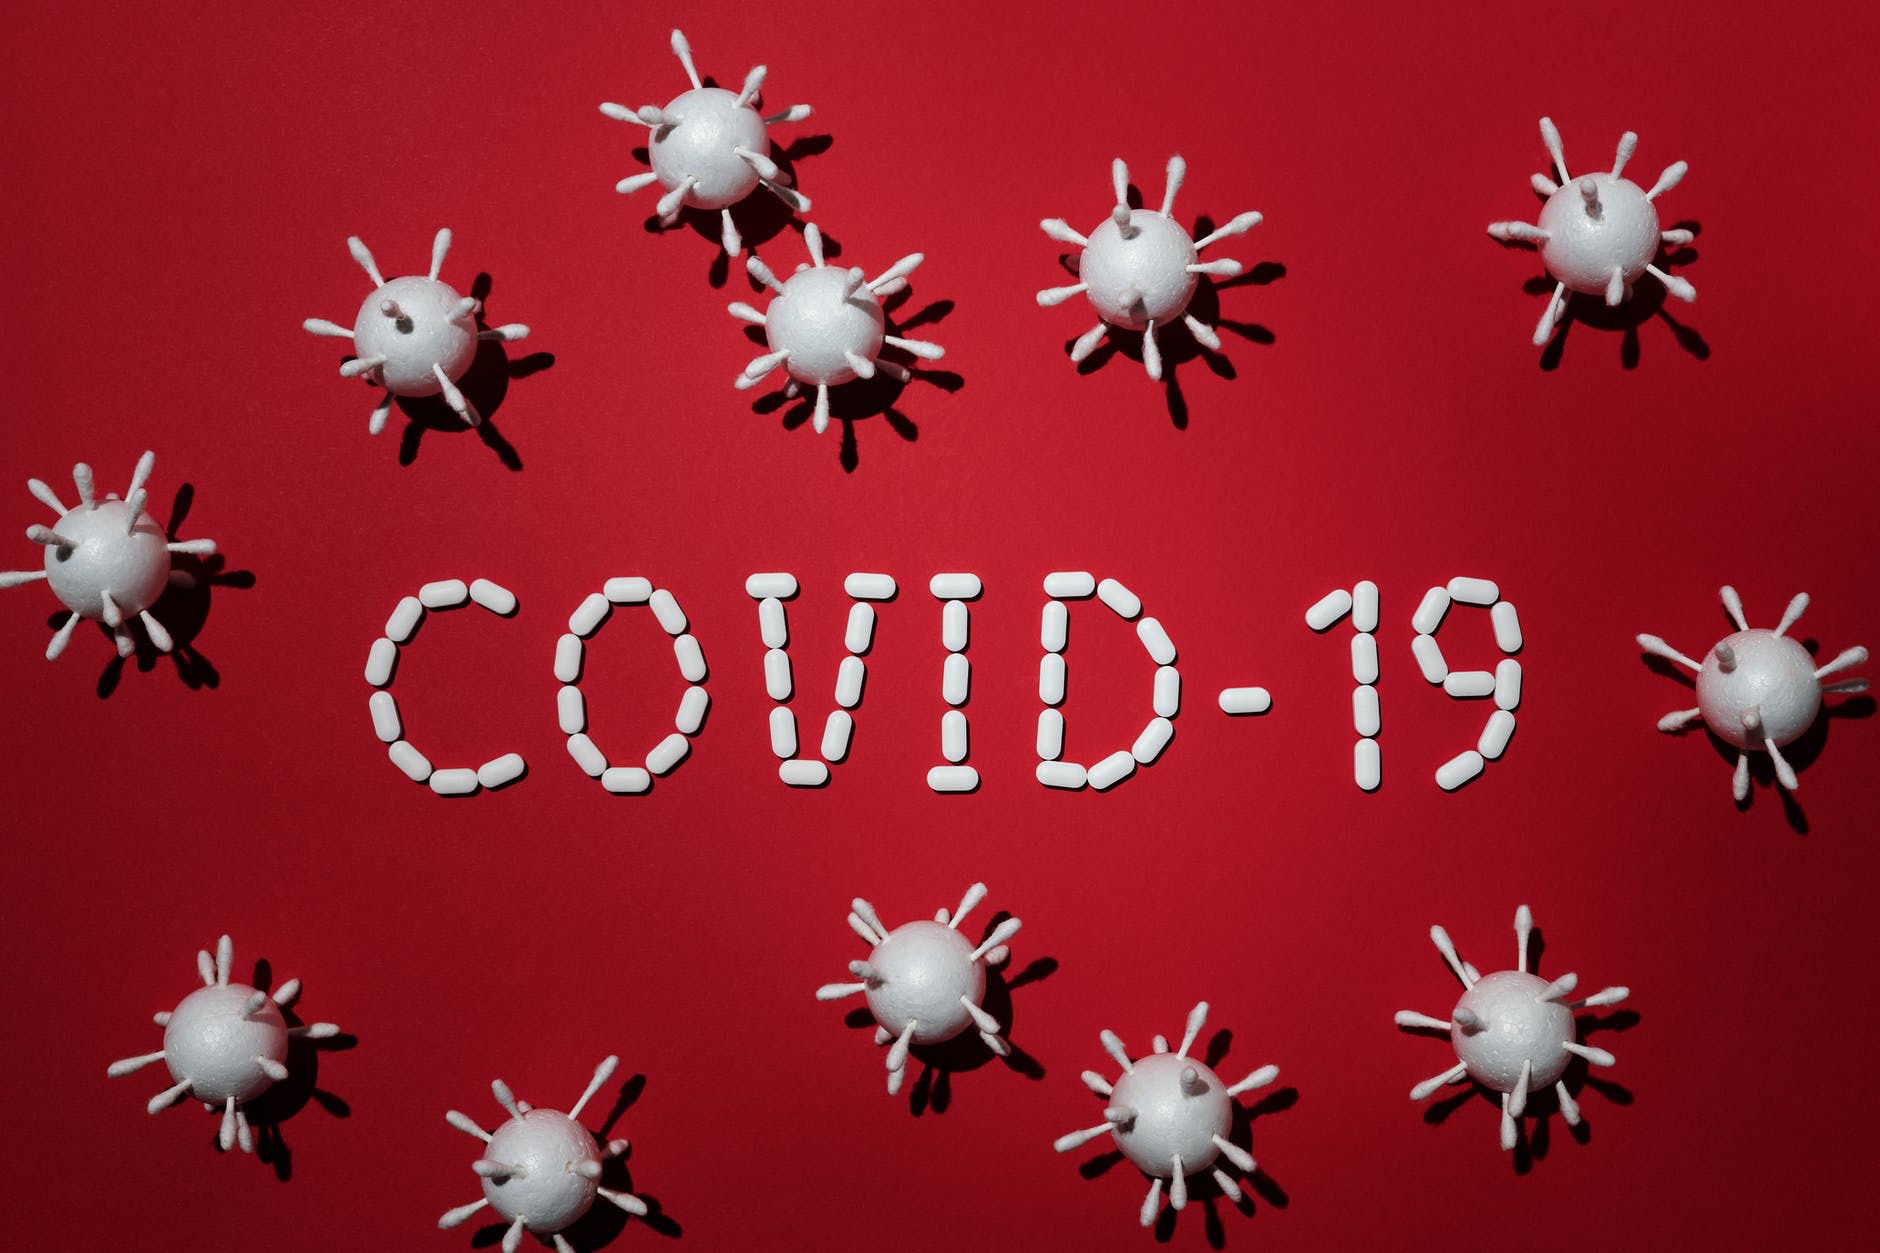 COVID-19 Prayer of the Day - a prayer for the COVID-19 Coronavirus pandemic. #COVD-19 